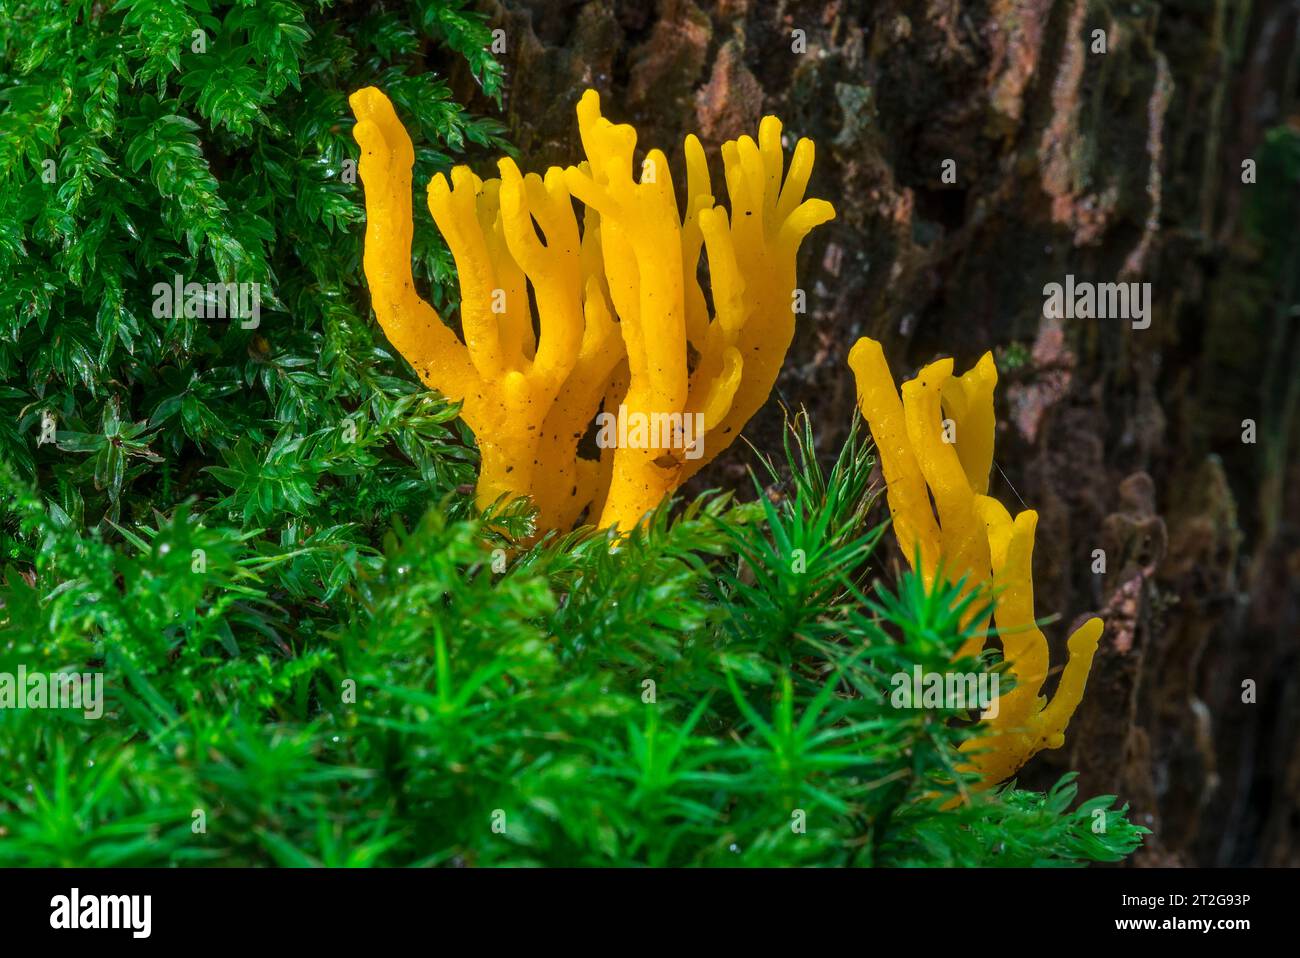 Yellow stagshorn (Calocera viscosa), jelly fungus with typical orange branching basidiocarps growing on decaying conifer wood in autumn forest Stock Photo